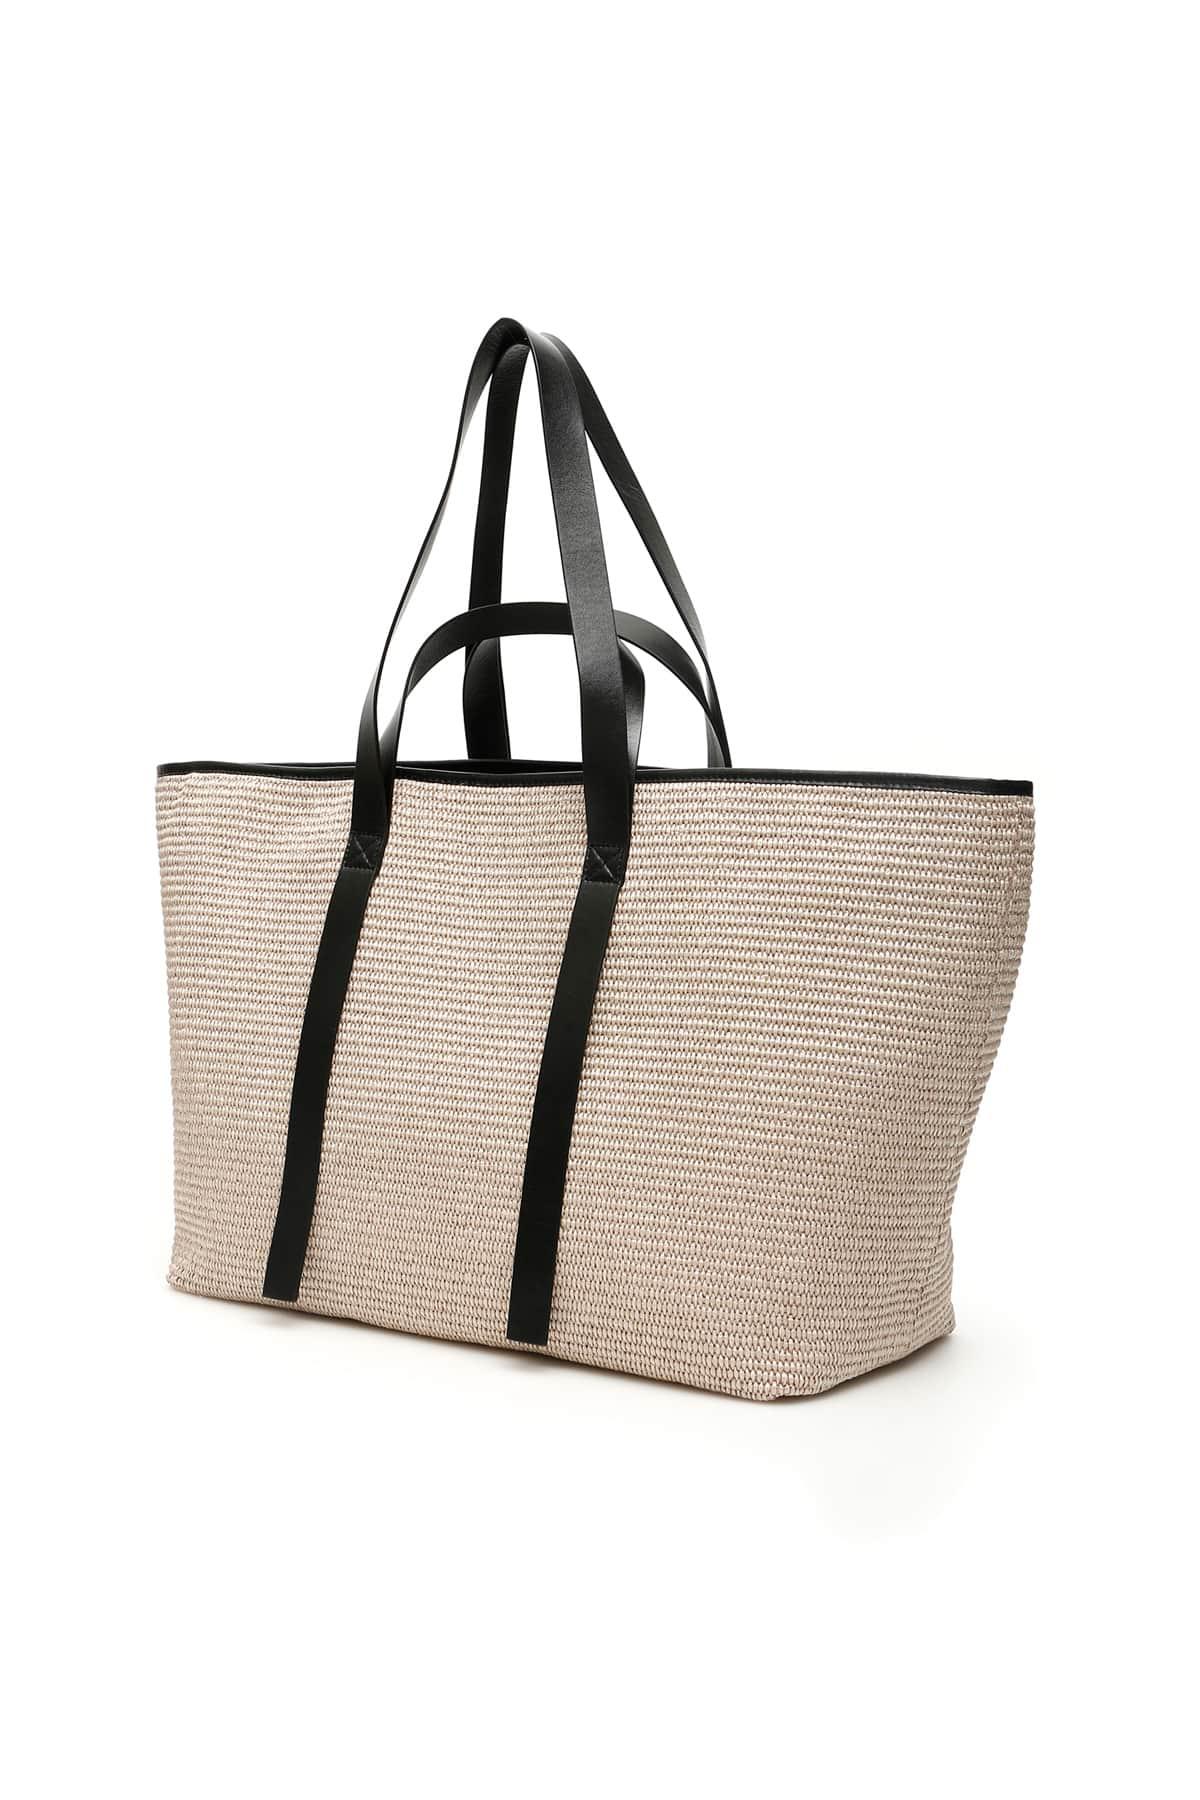 ORGANIC MADE STANDARD TOTE - OFF WHITE (S)